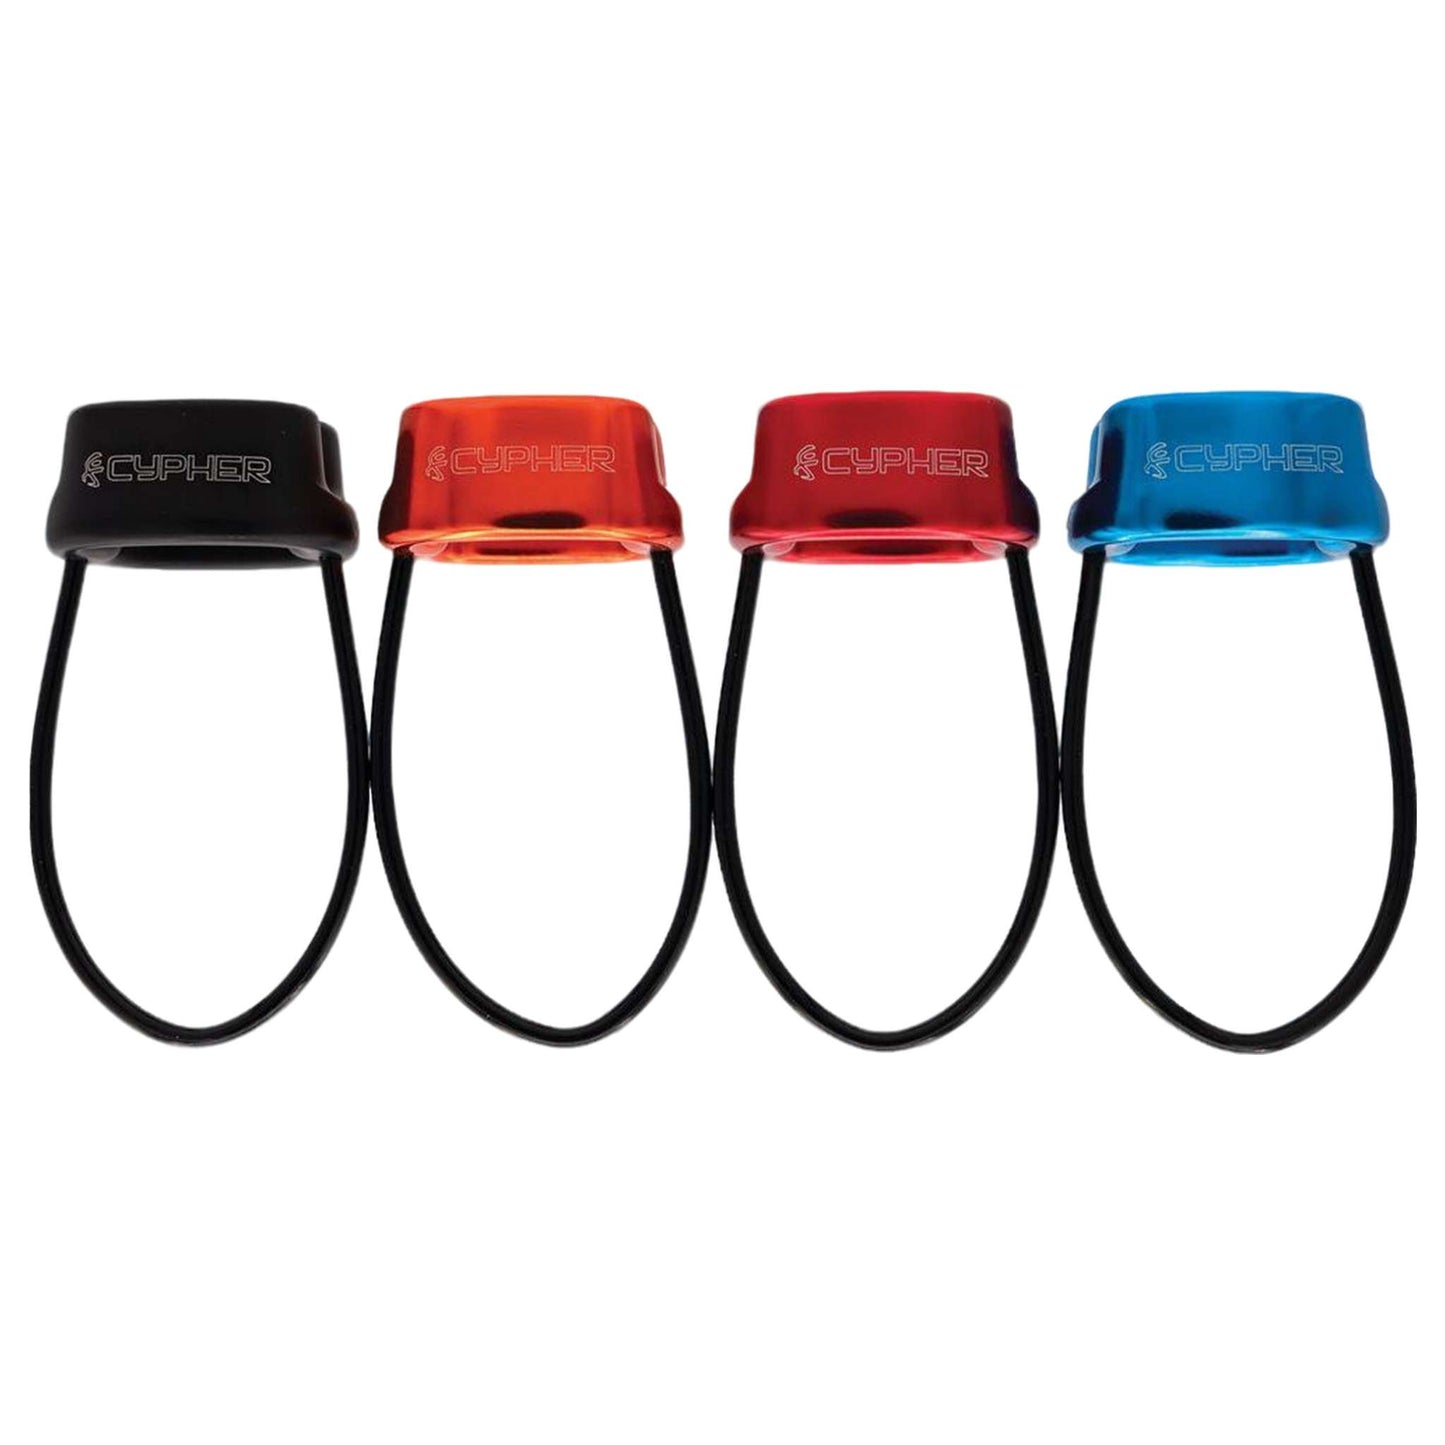 ARC Belay Device - High-Density Aluminum for Smooth Rope Control